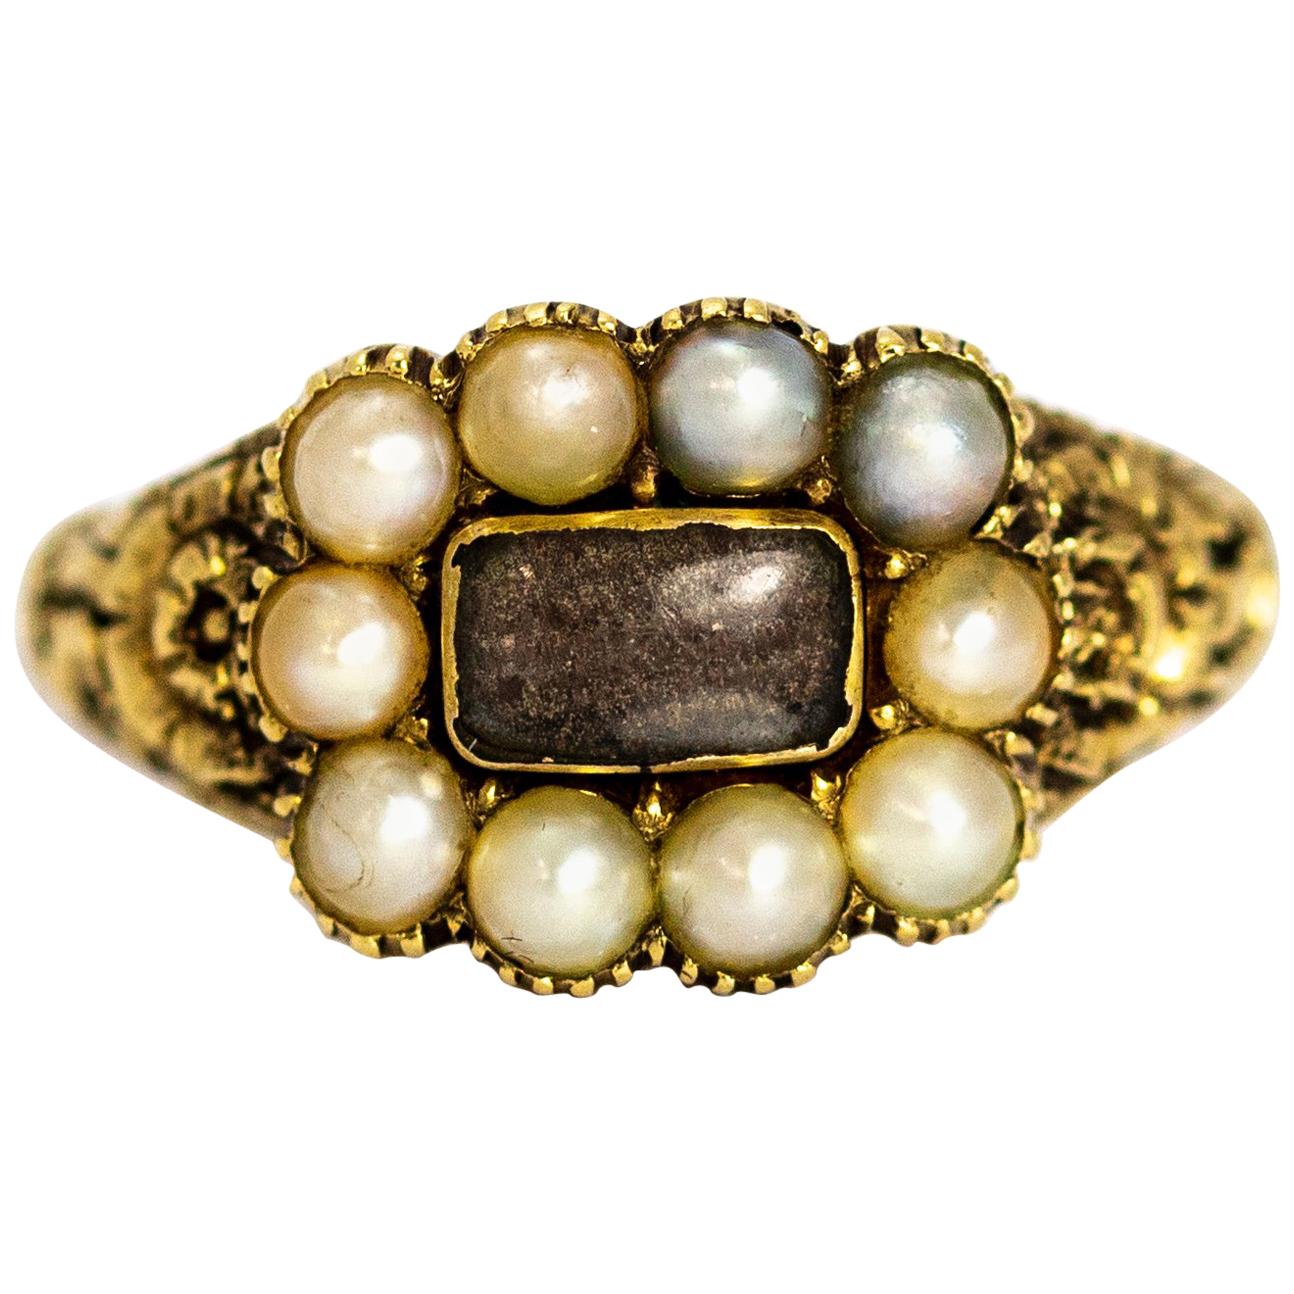 What finger do you wear a mourning ring on?